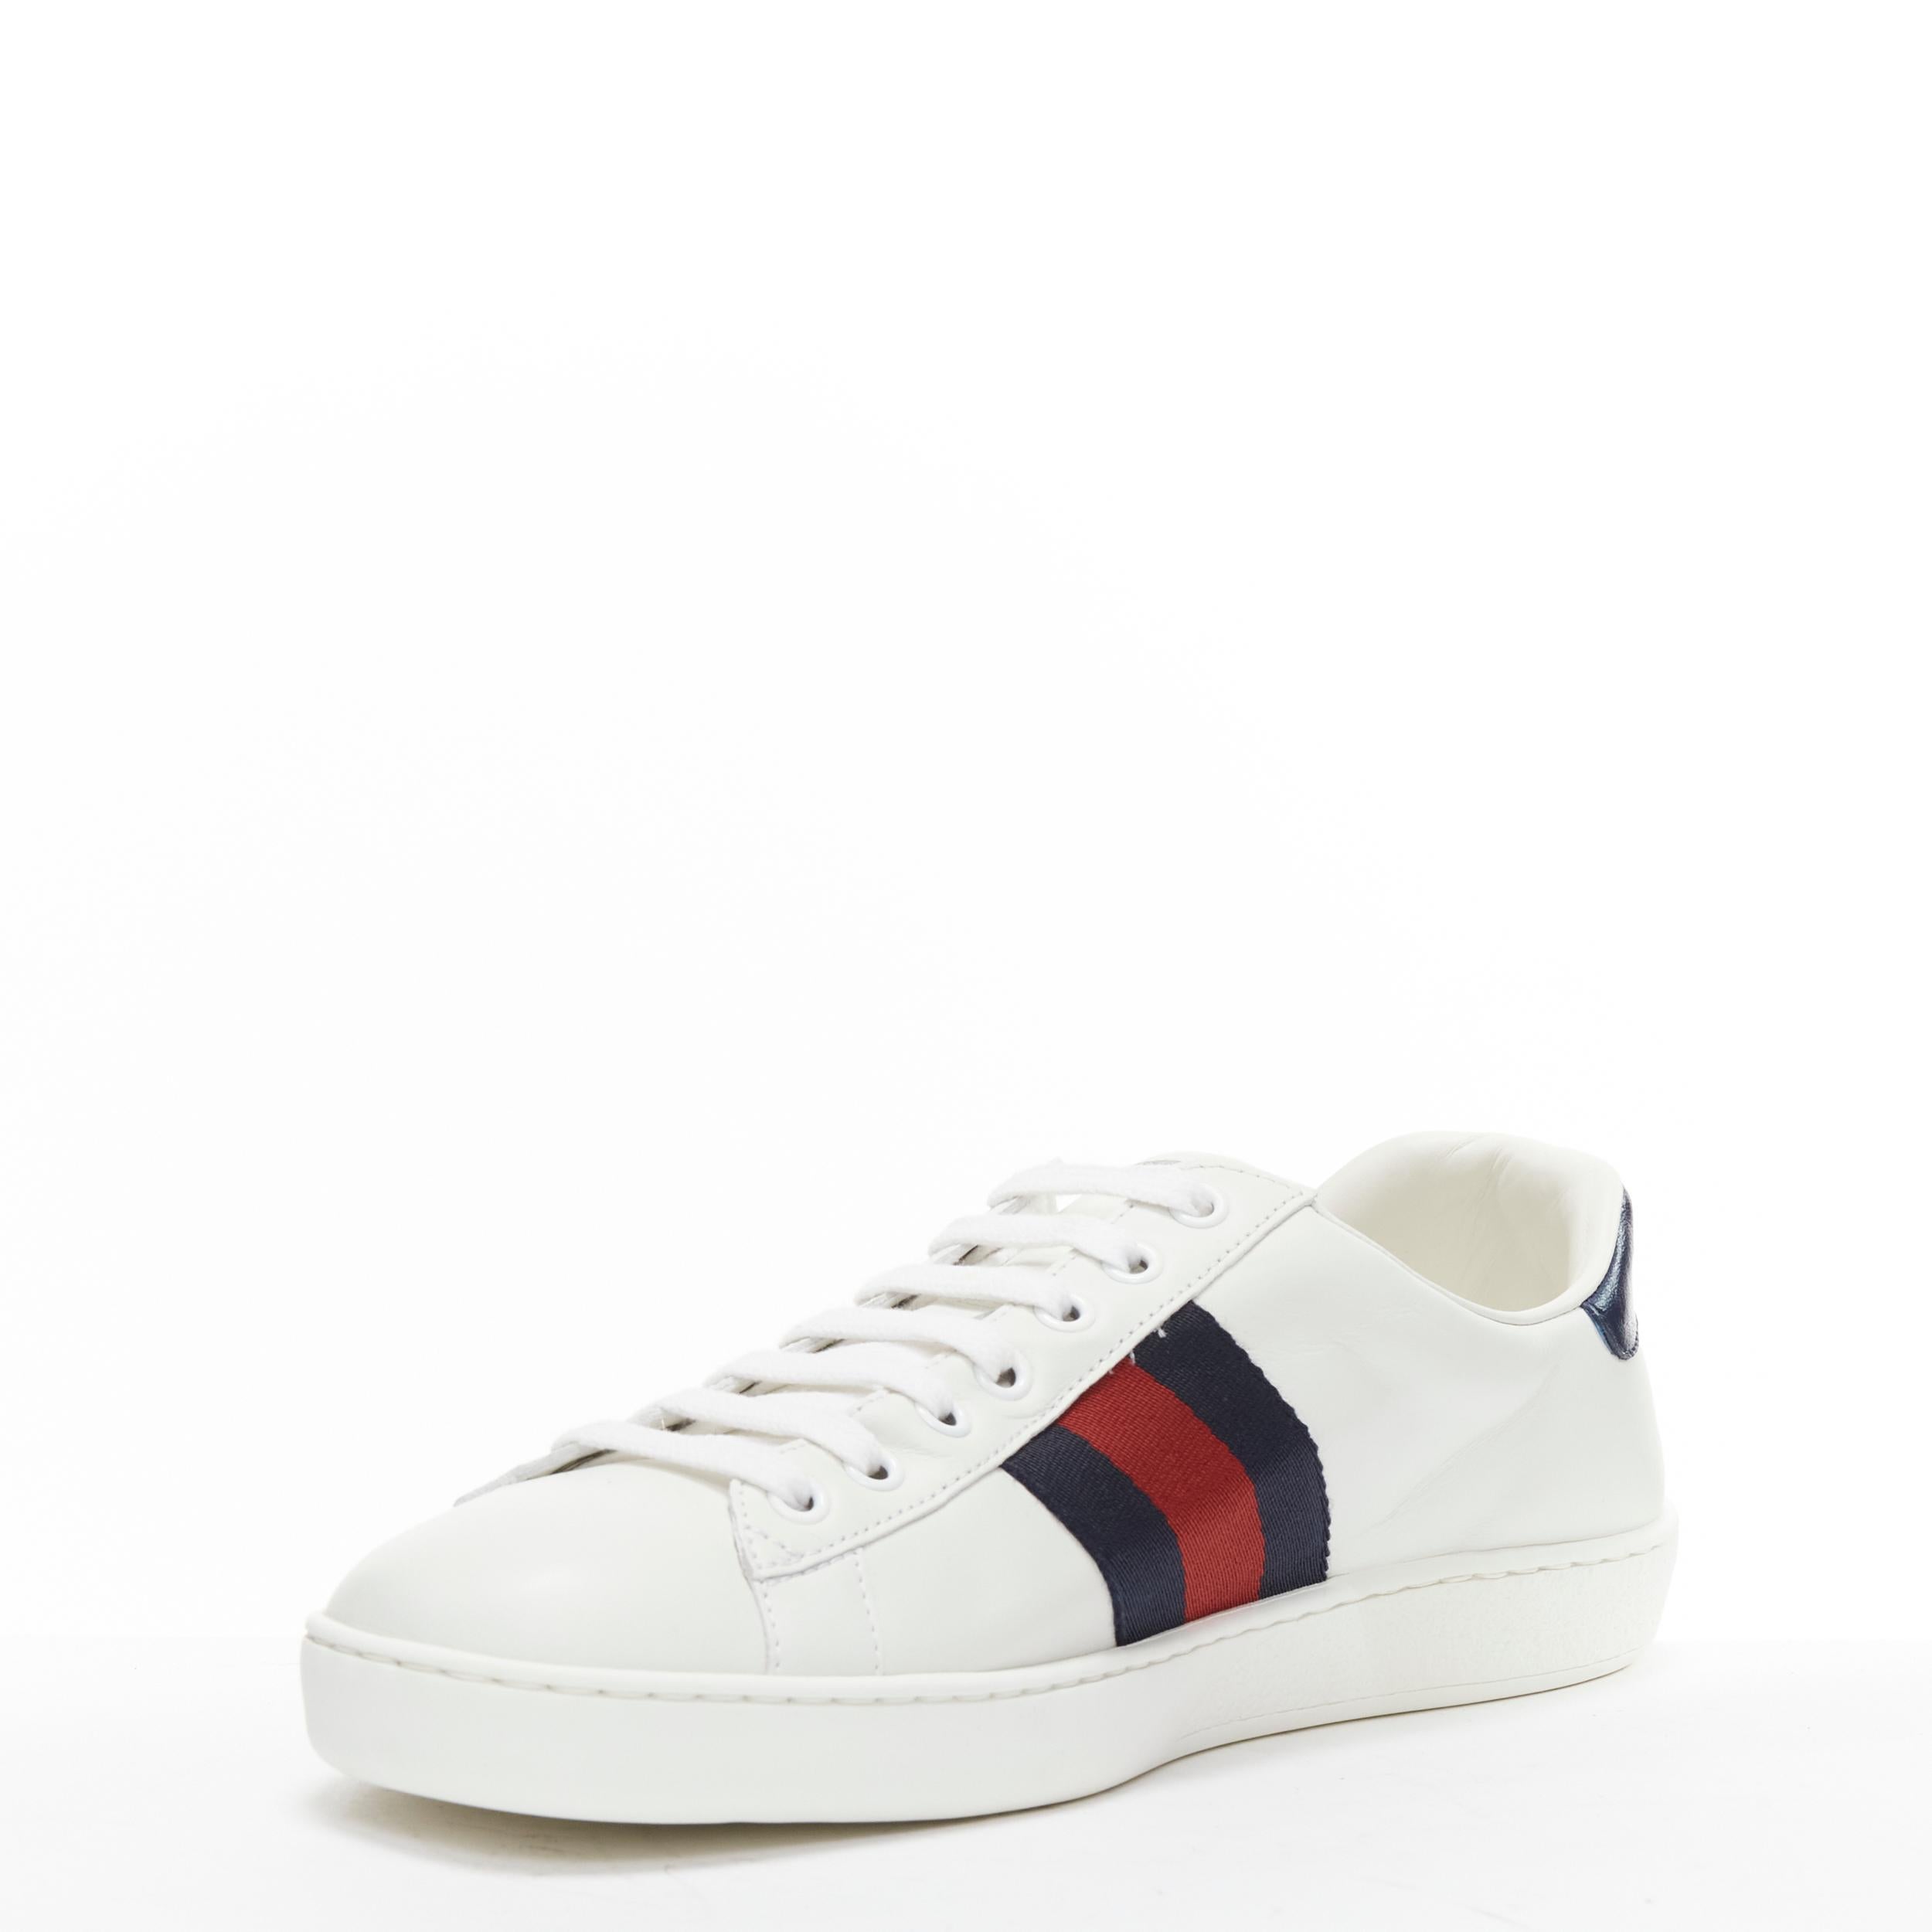 Men's GUCCI Ace Loved gold embroidered blue red web leather sneakers UK7 EU41 For Sale